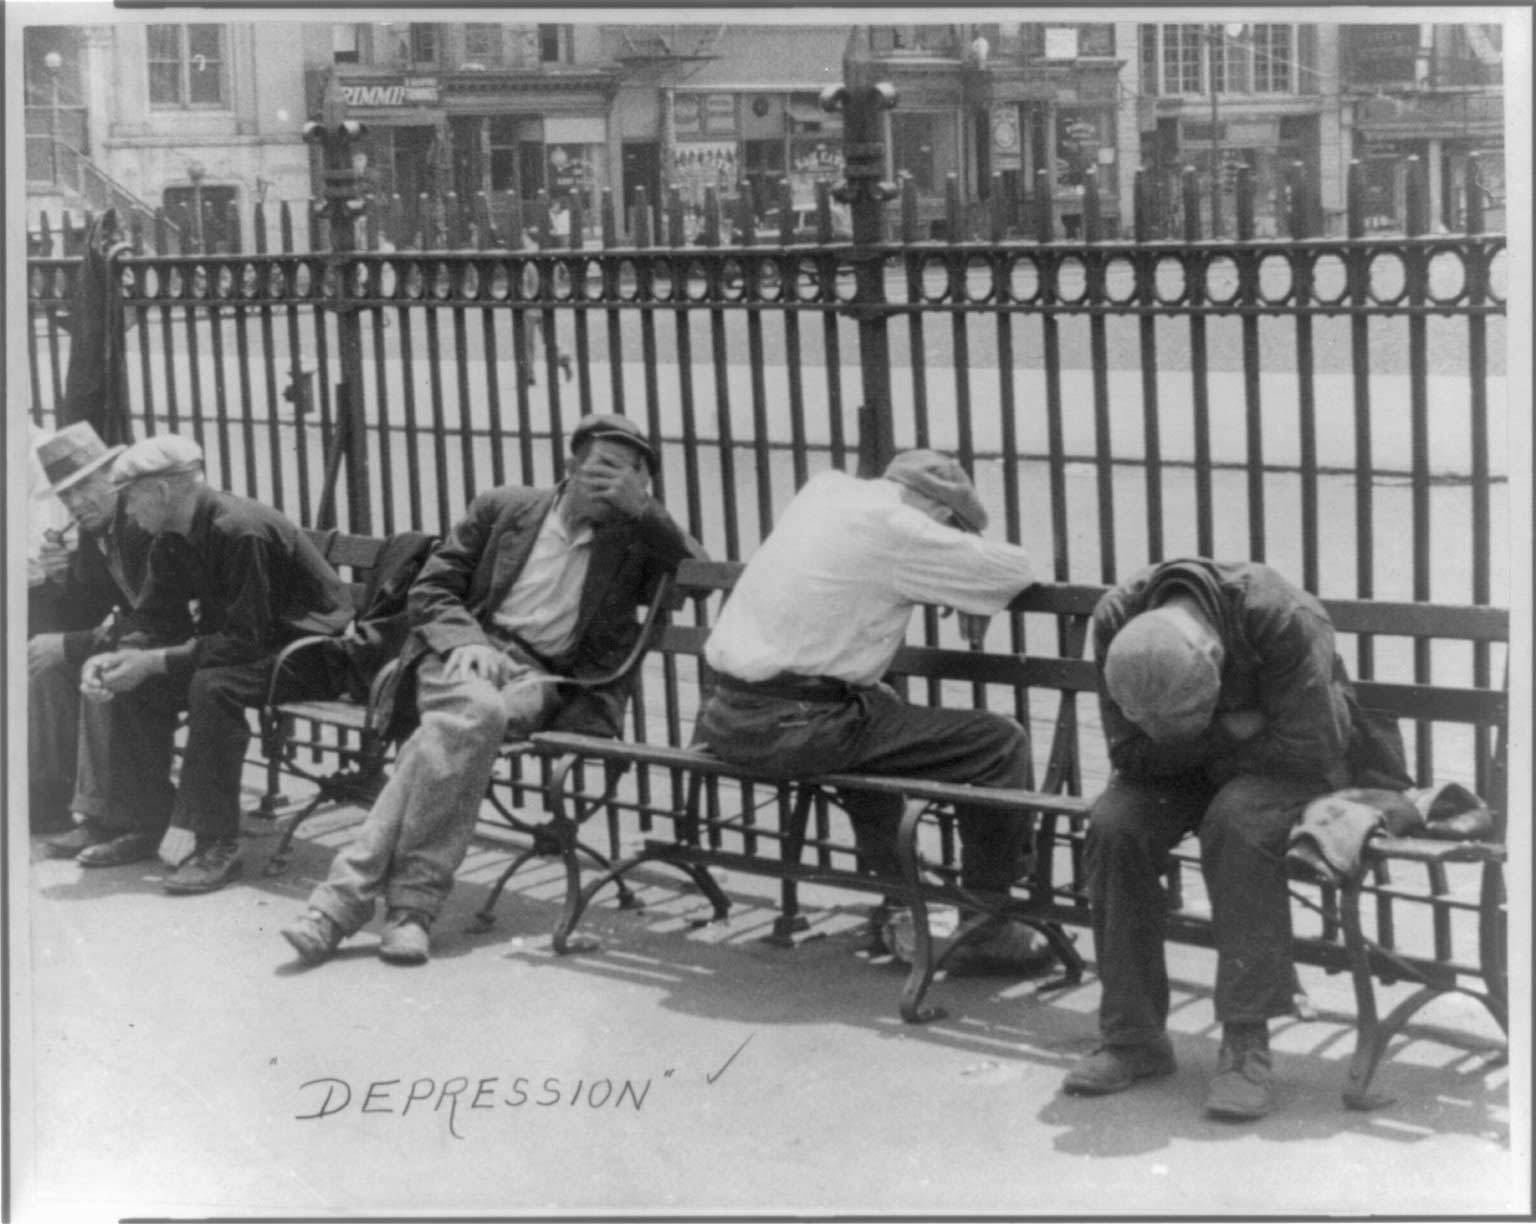 Men slumped over while seated on a bench